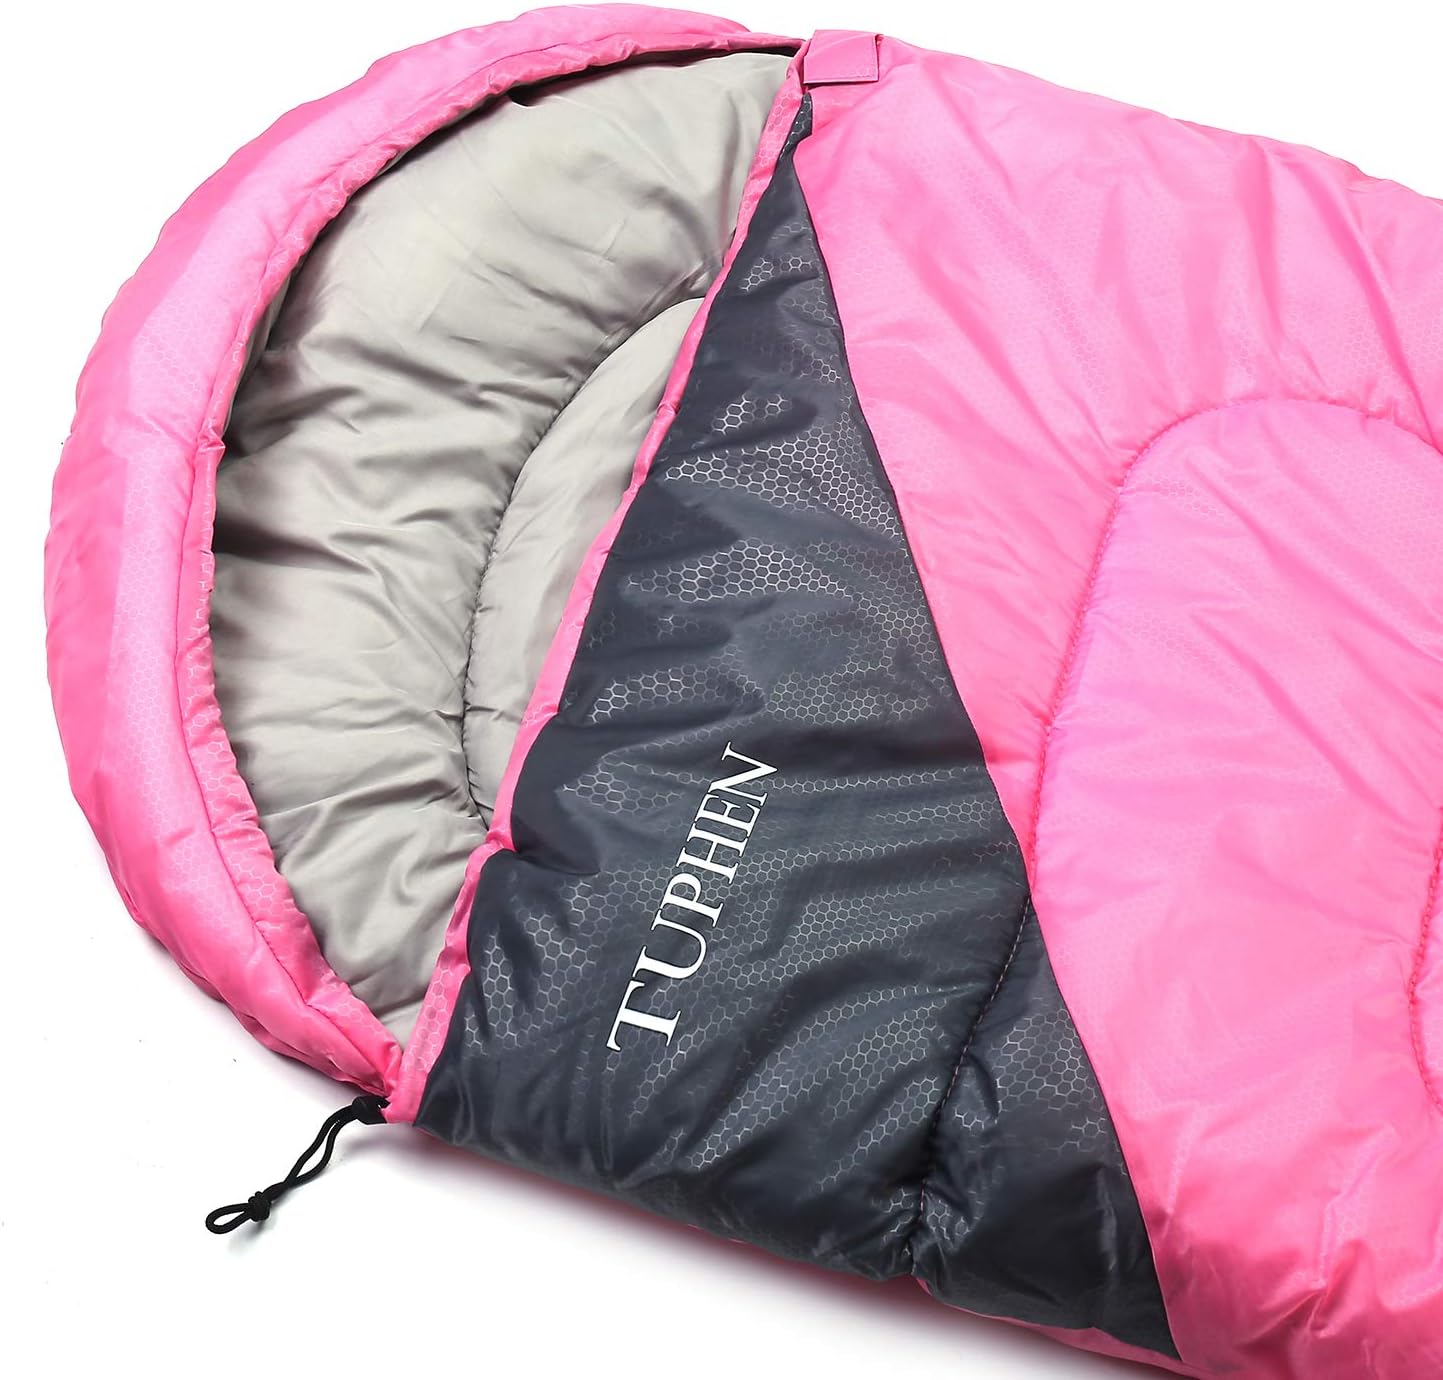 tuphen- Sleeping Bags for Adults Kids